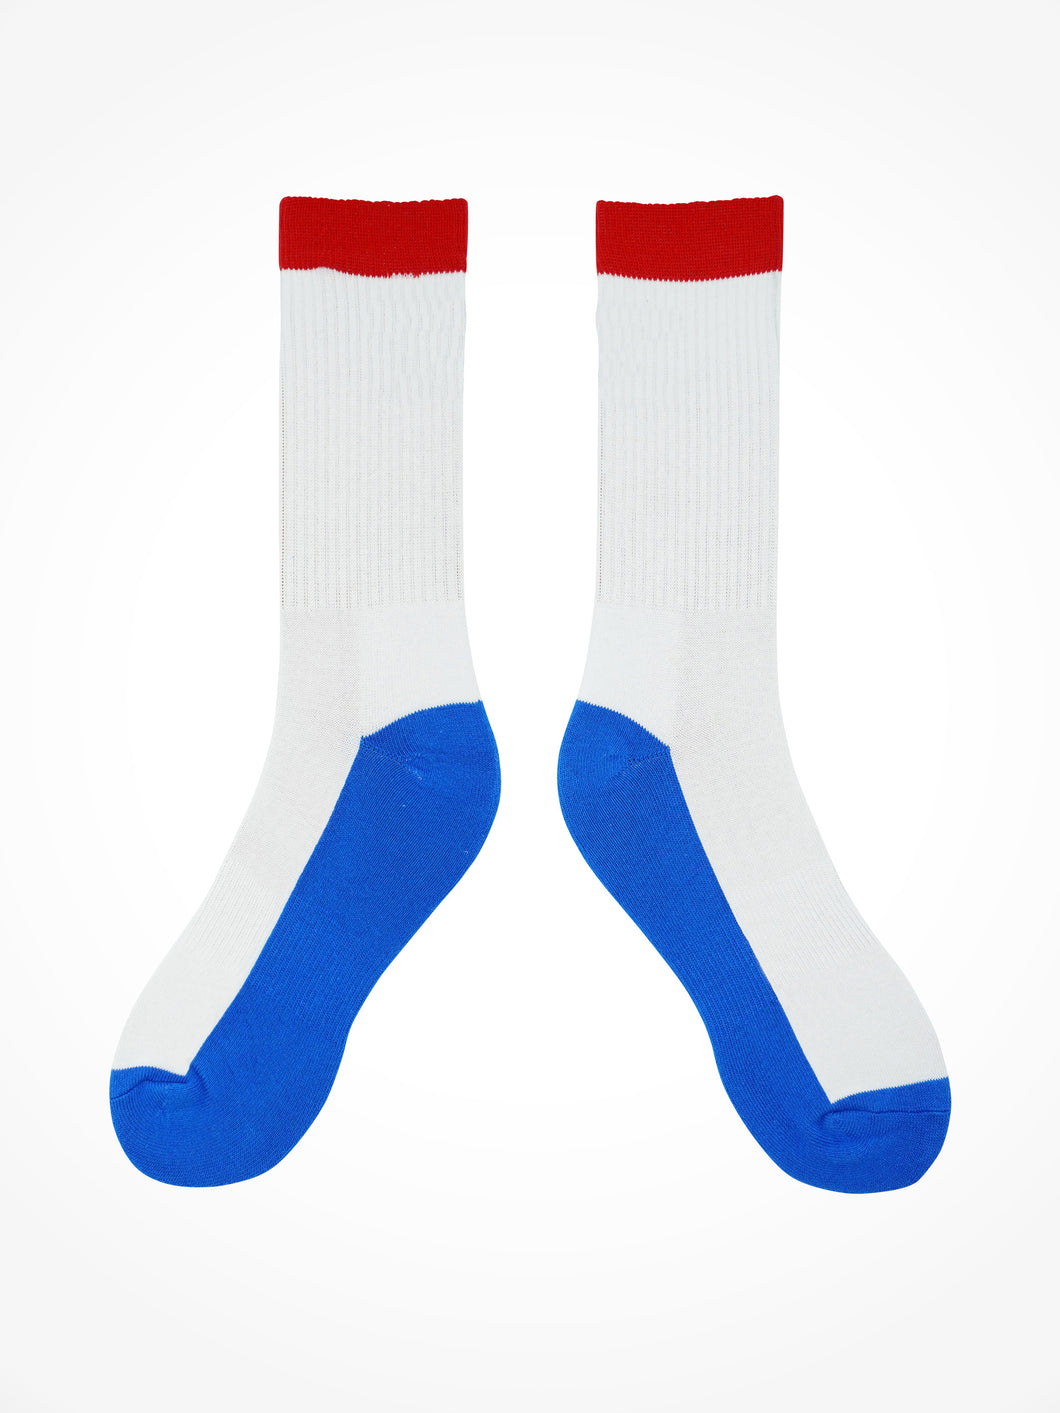 Red White and Blue Socks